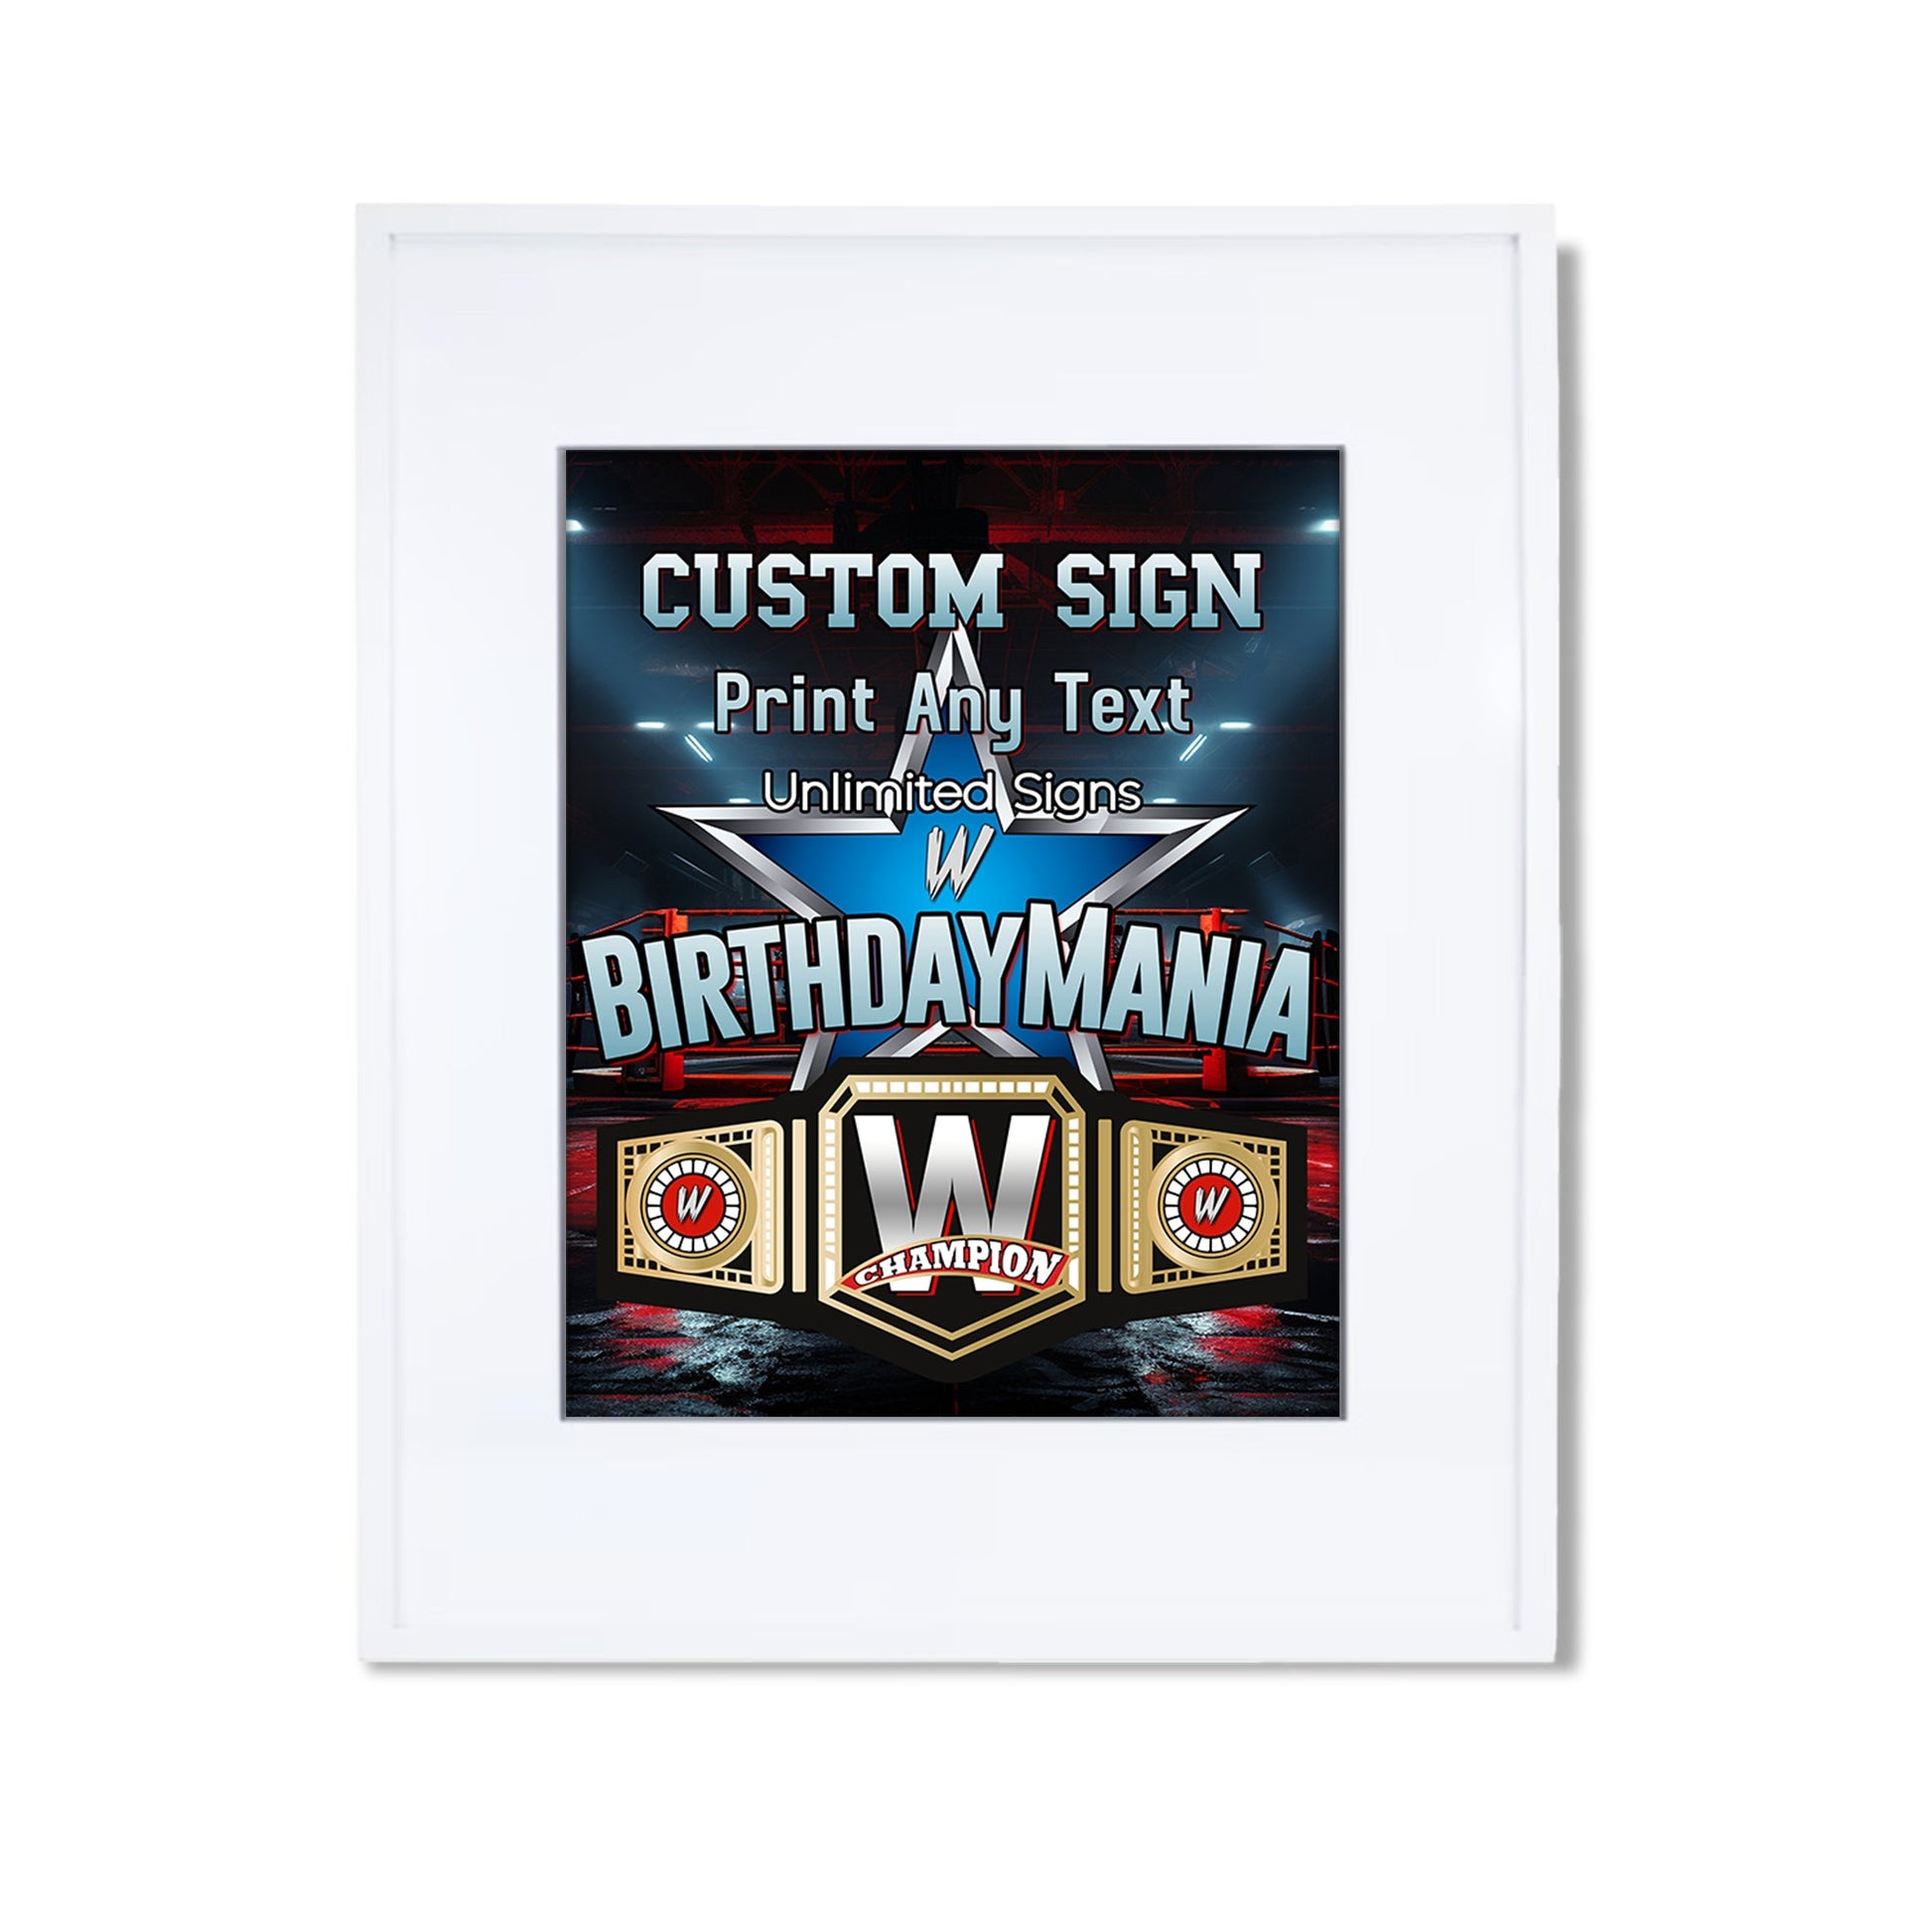 Custom WWE sign for personal events